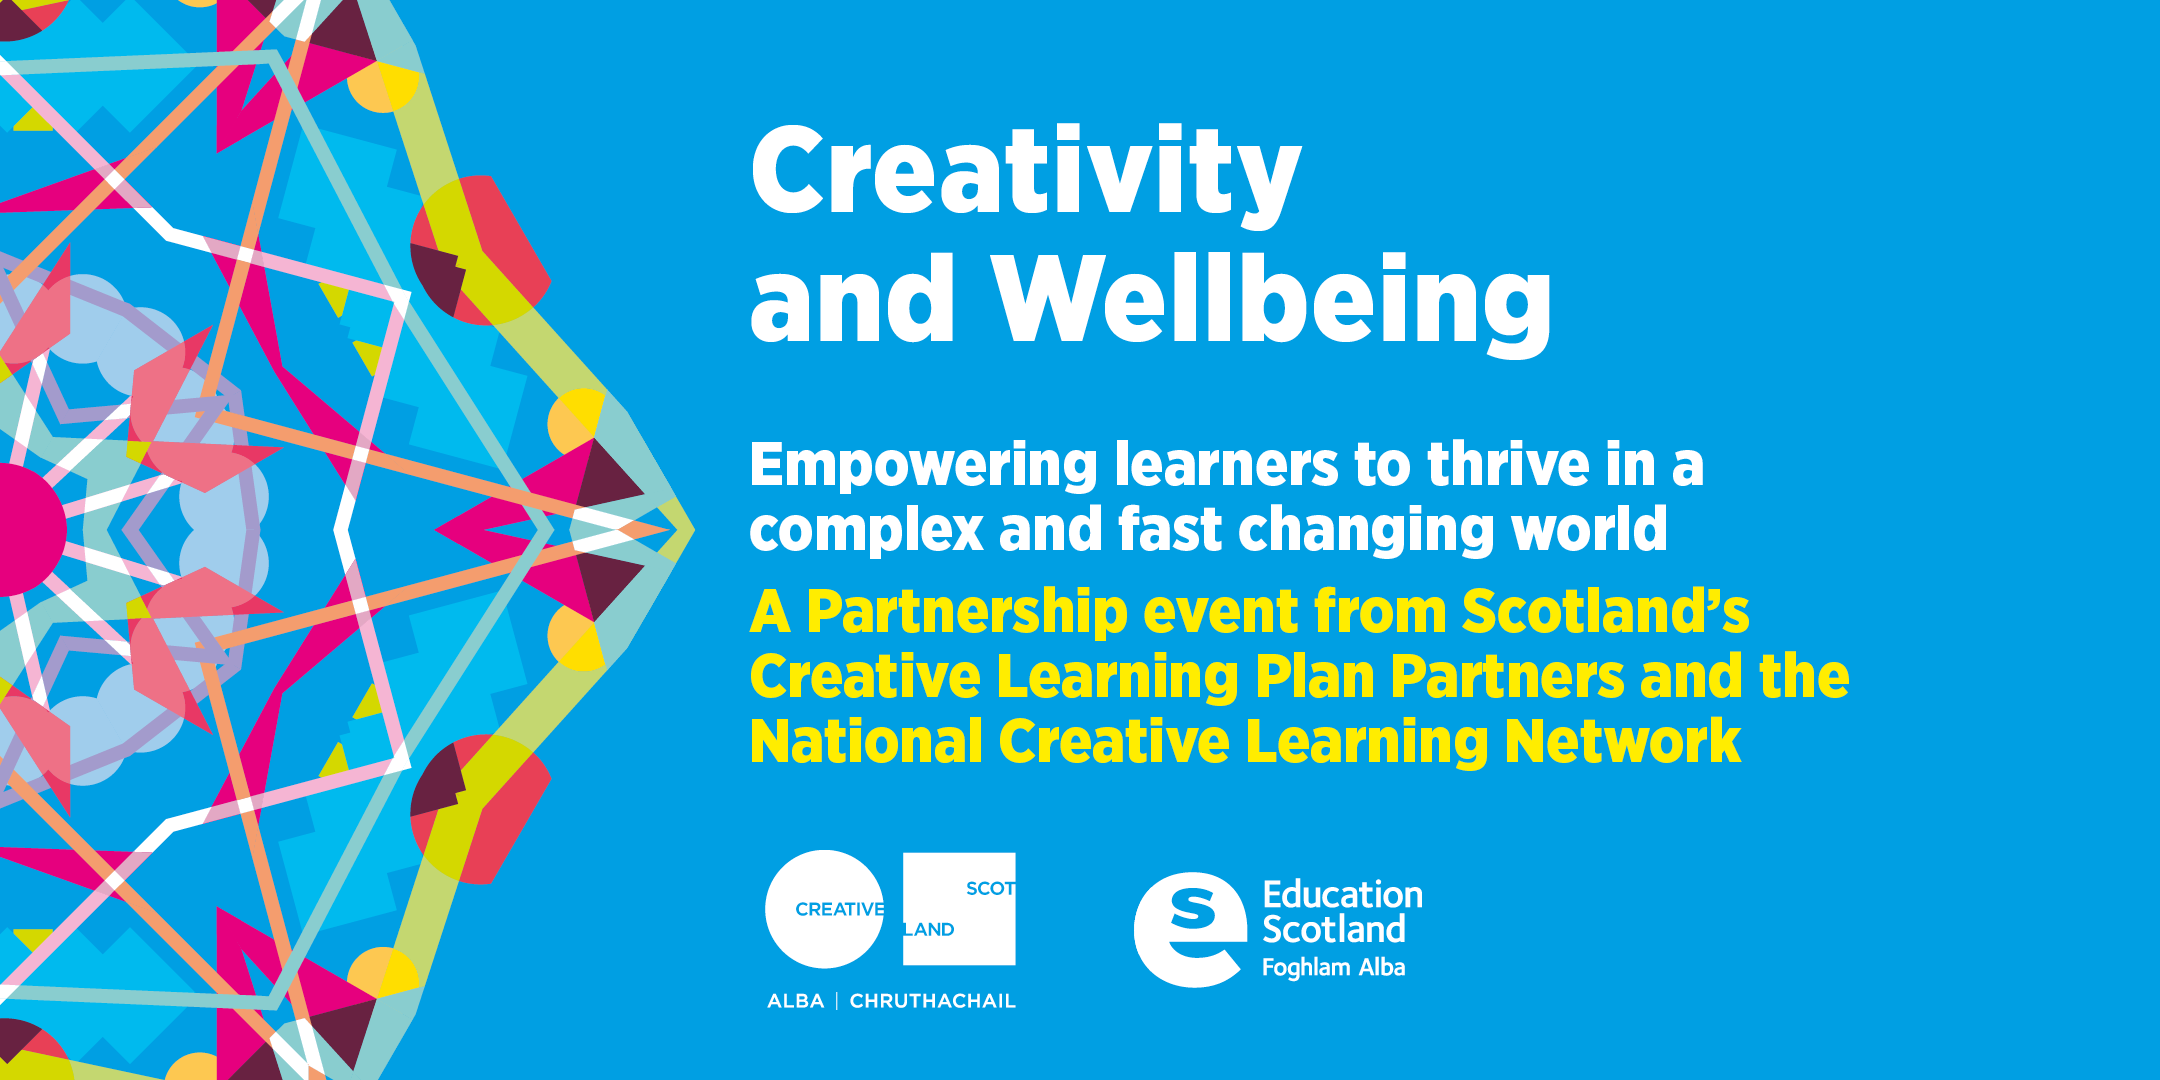 Creativity and Wellbeing, A week of events from Scotland's Creative Learning Plan partners and the National Creative Learning Network. Creative Scotland Logo and Education Scotland Logo